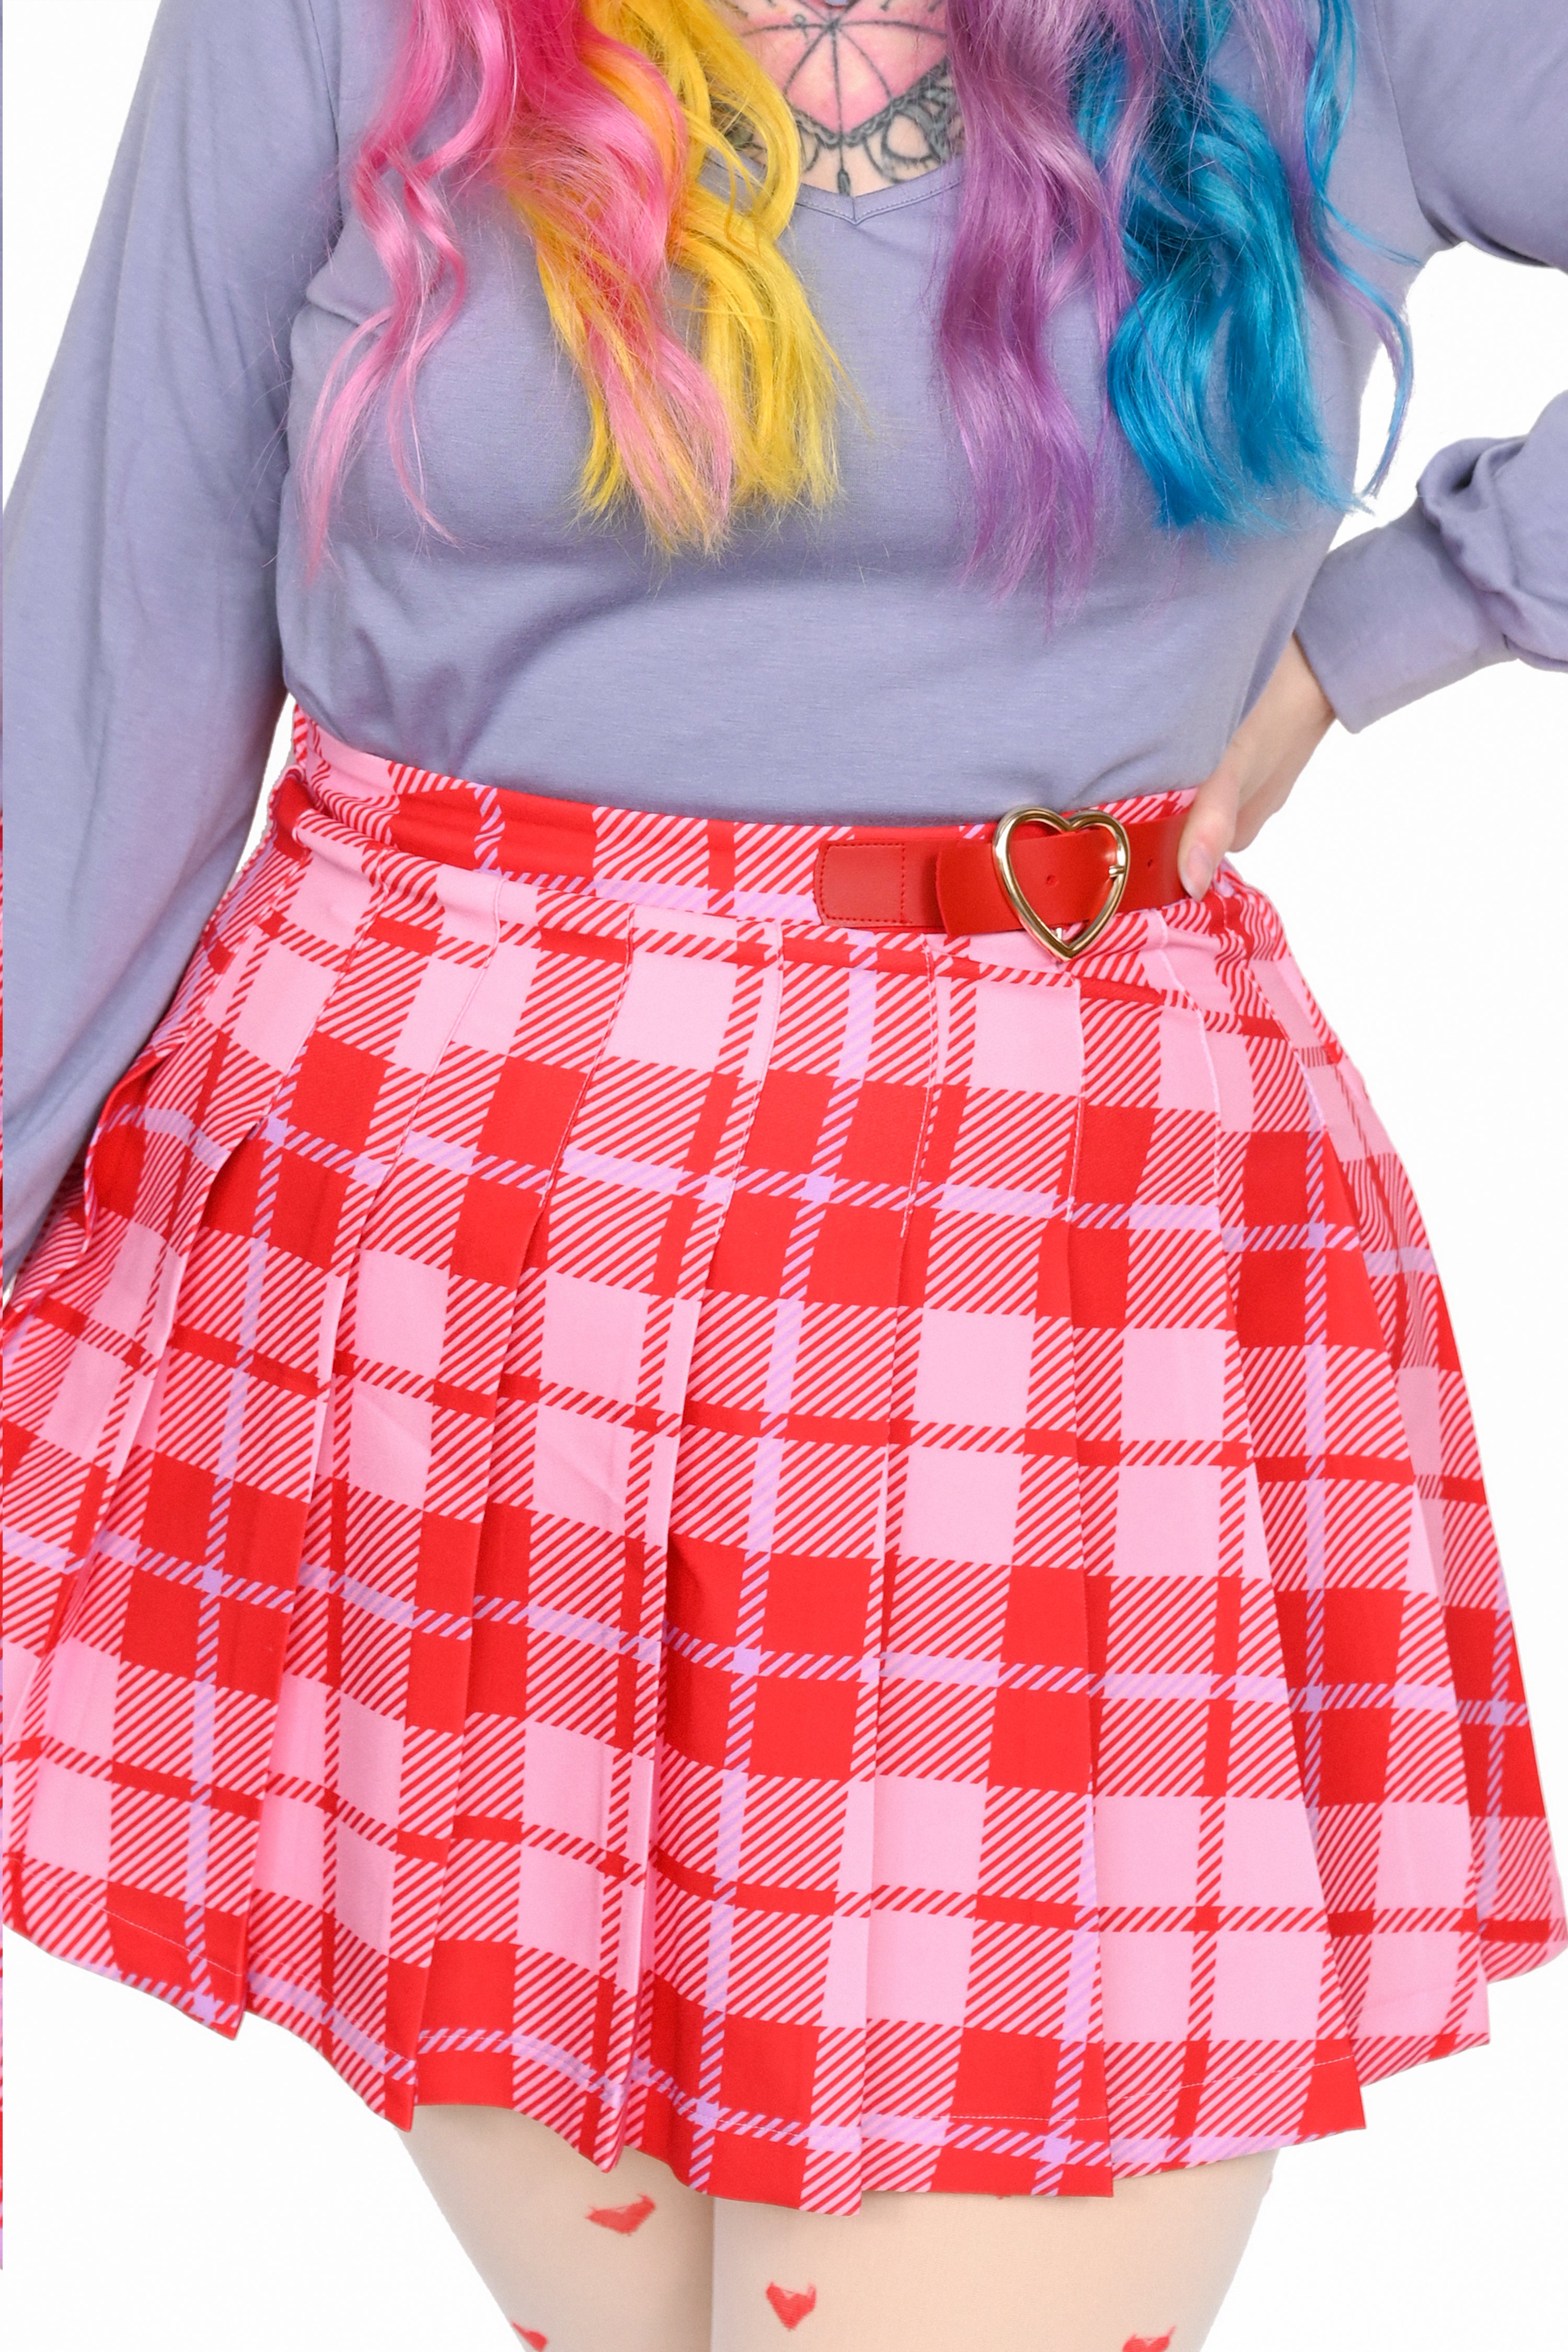 Valentine Claire Pleated Skirt - XS & S left!